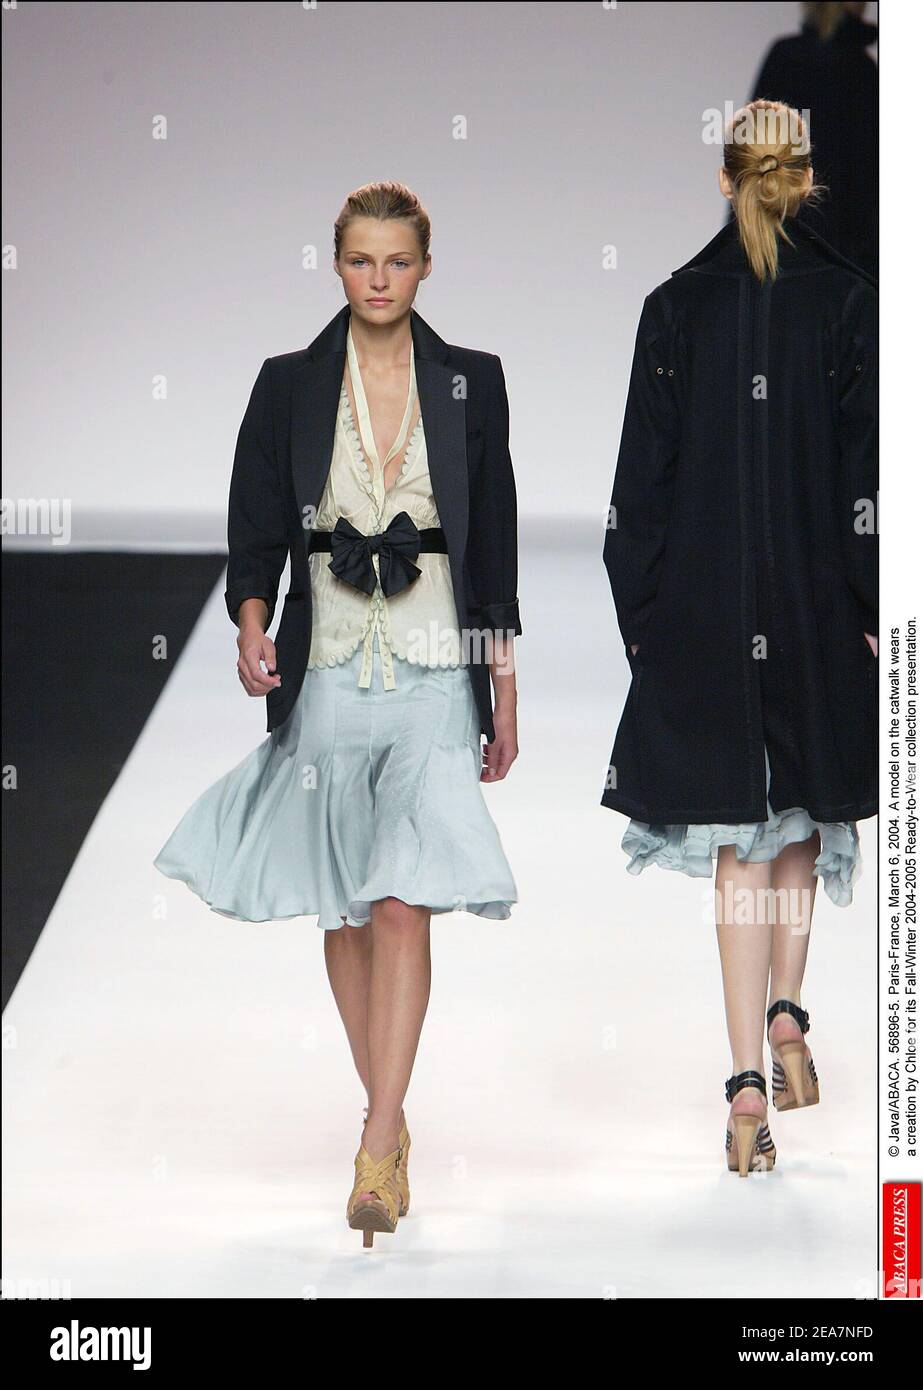 © Java/ABACA. 56896-5. Paris-France, March 6, 2004. A model on the catwalk wears a creation by Chloe for its Fall-Winter 2004-2005 Ready-to-Wear collection presentation. Stock Photo